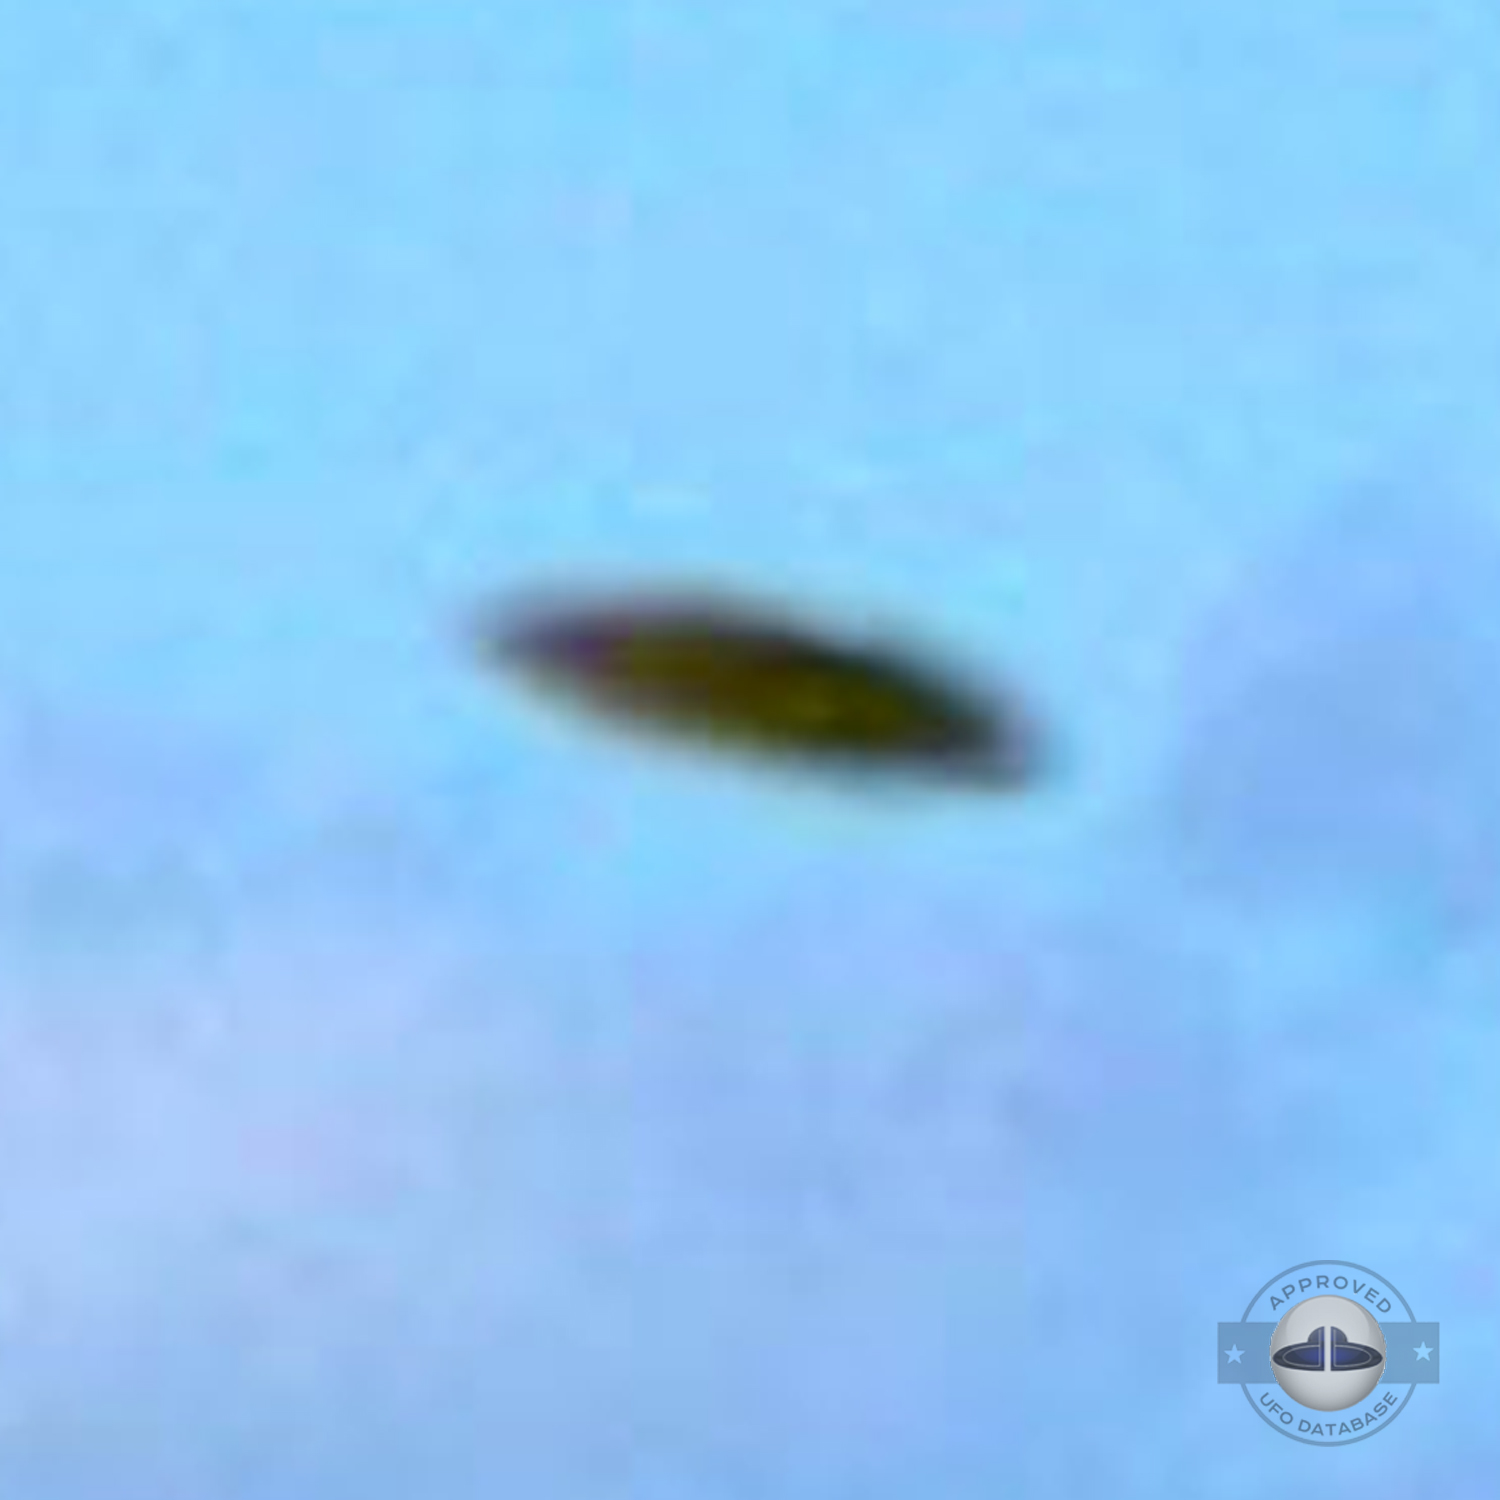 UFO picture taken on october 21, 2004 over the Kaneohe Bay in Hawaii UFO Picture #13-4